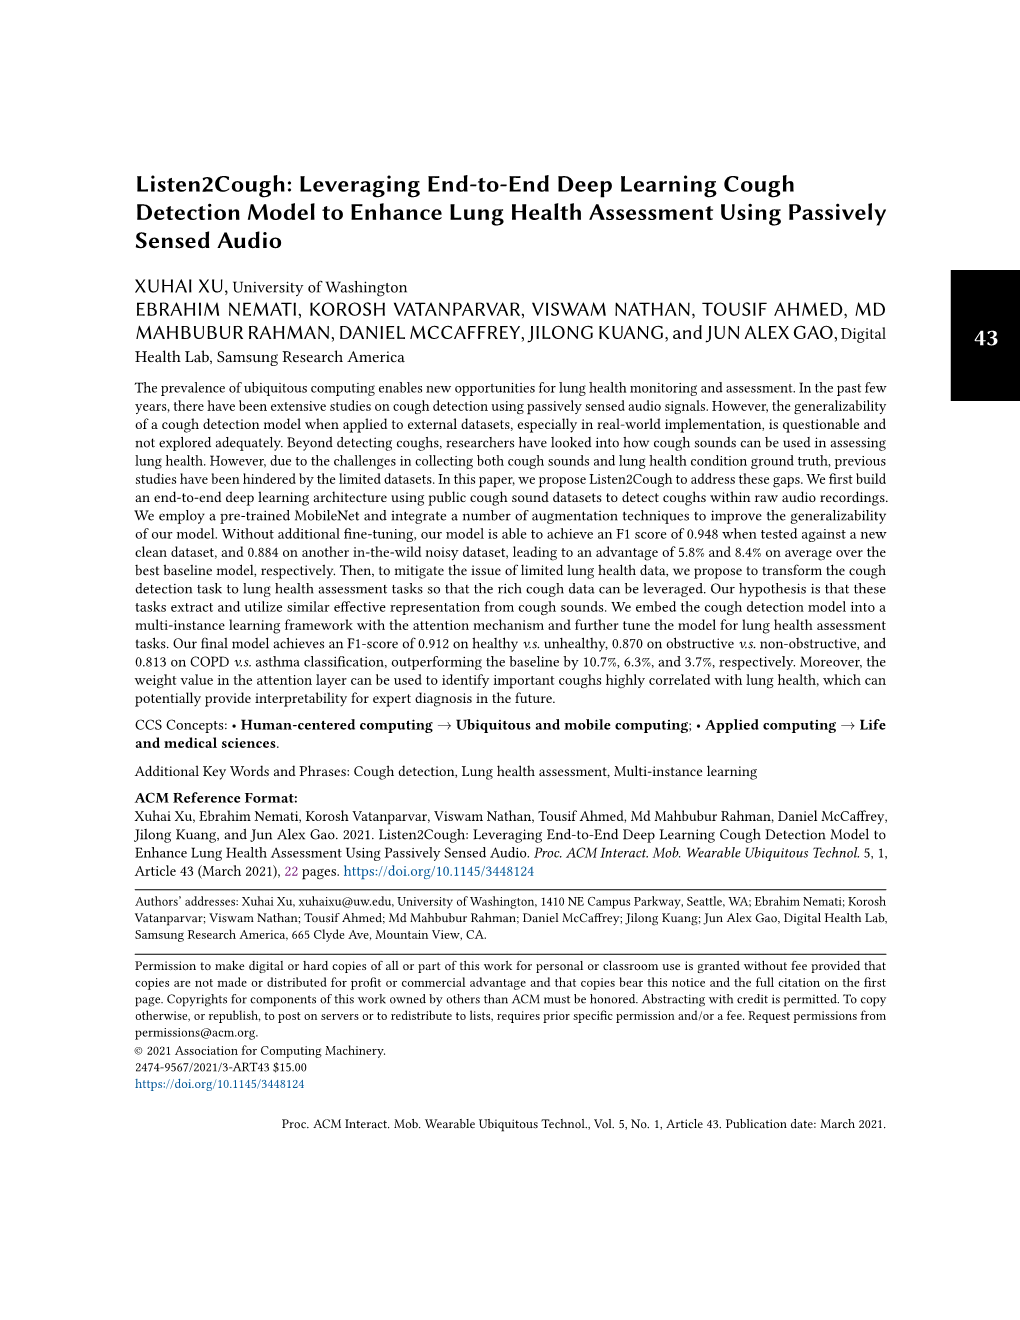 Leveraging End-To-End Deep Learning Cough Detection Model to Enhance Lung Health Assessment Using Passively Sensed Audio